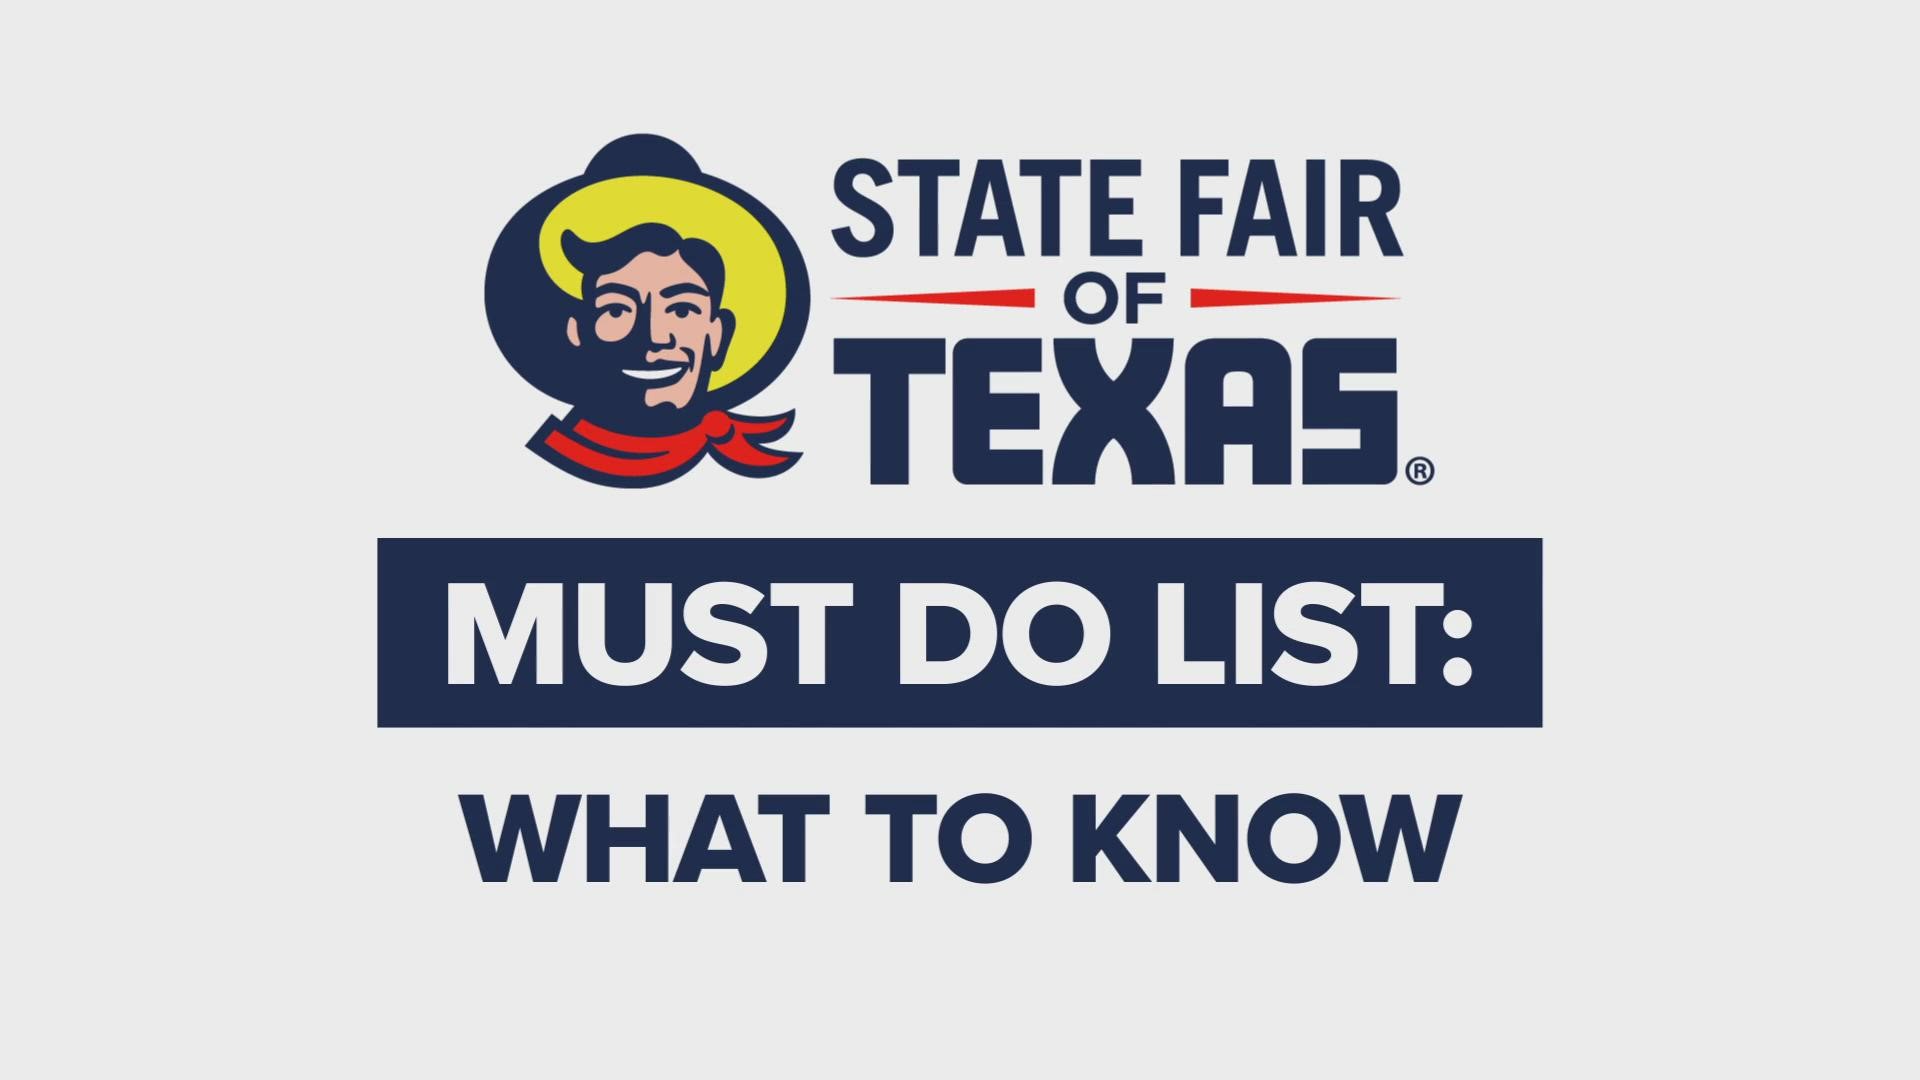 The State Fair of Texas is back! These are some of the things you must do if you are going this year.